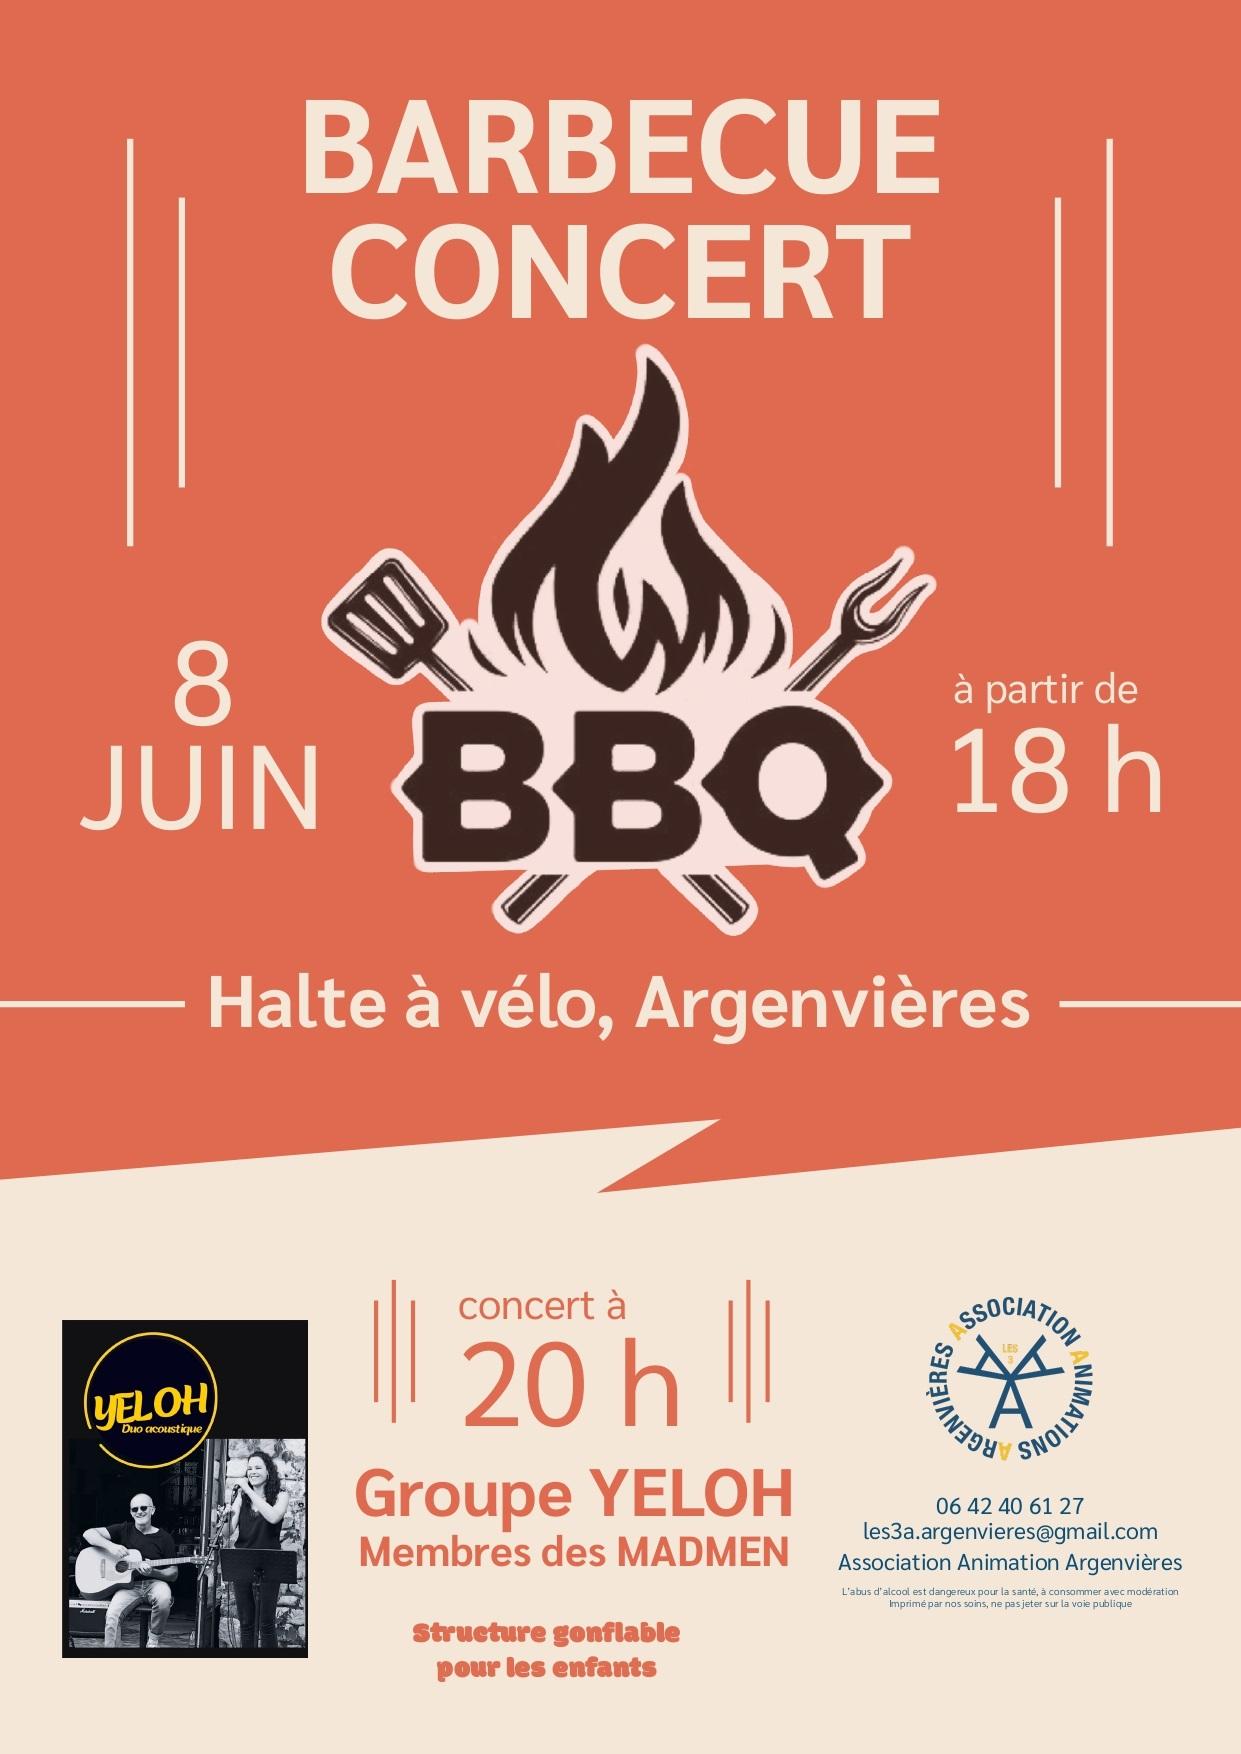 Barbecue argenvieres